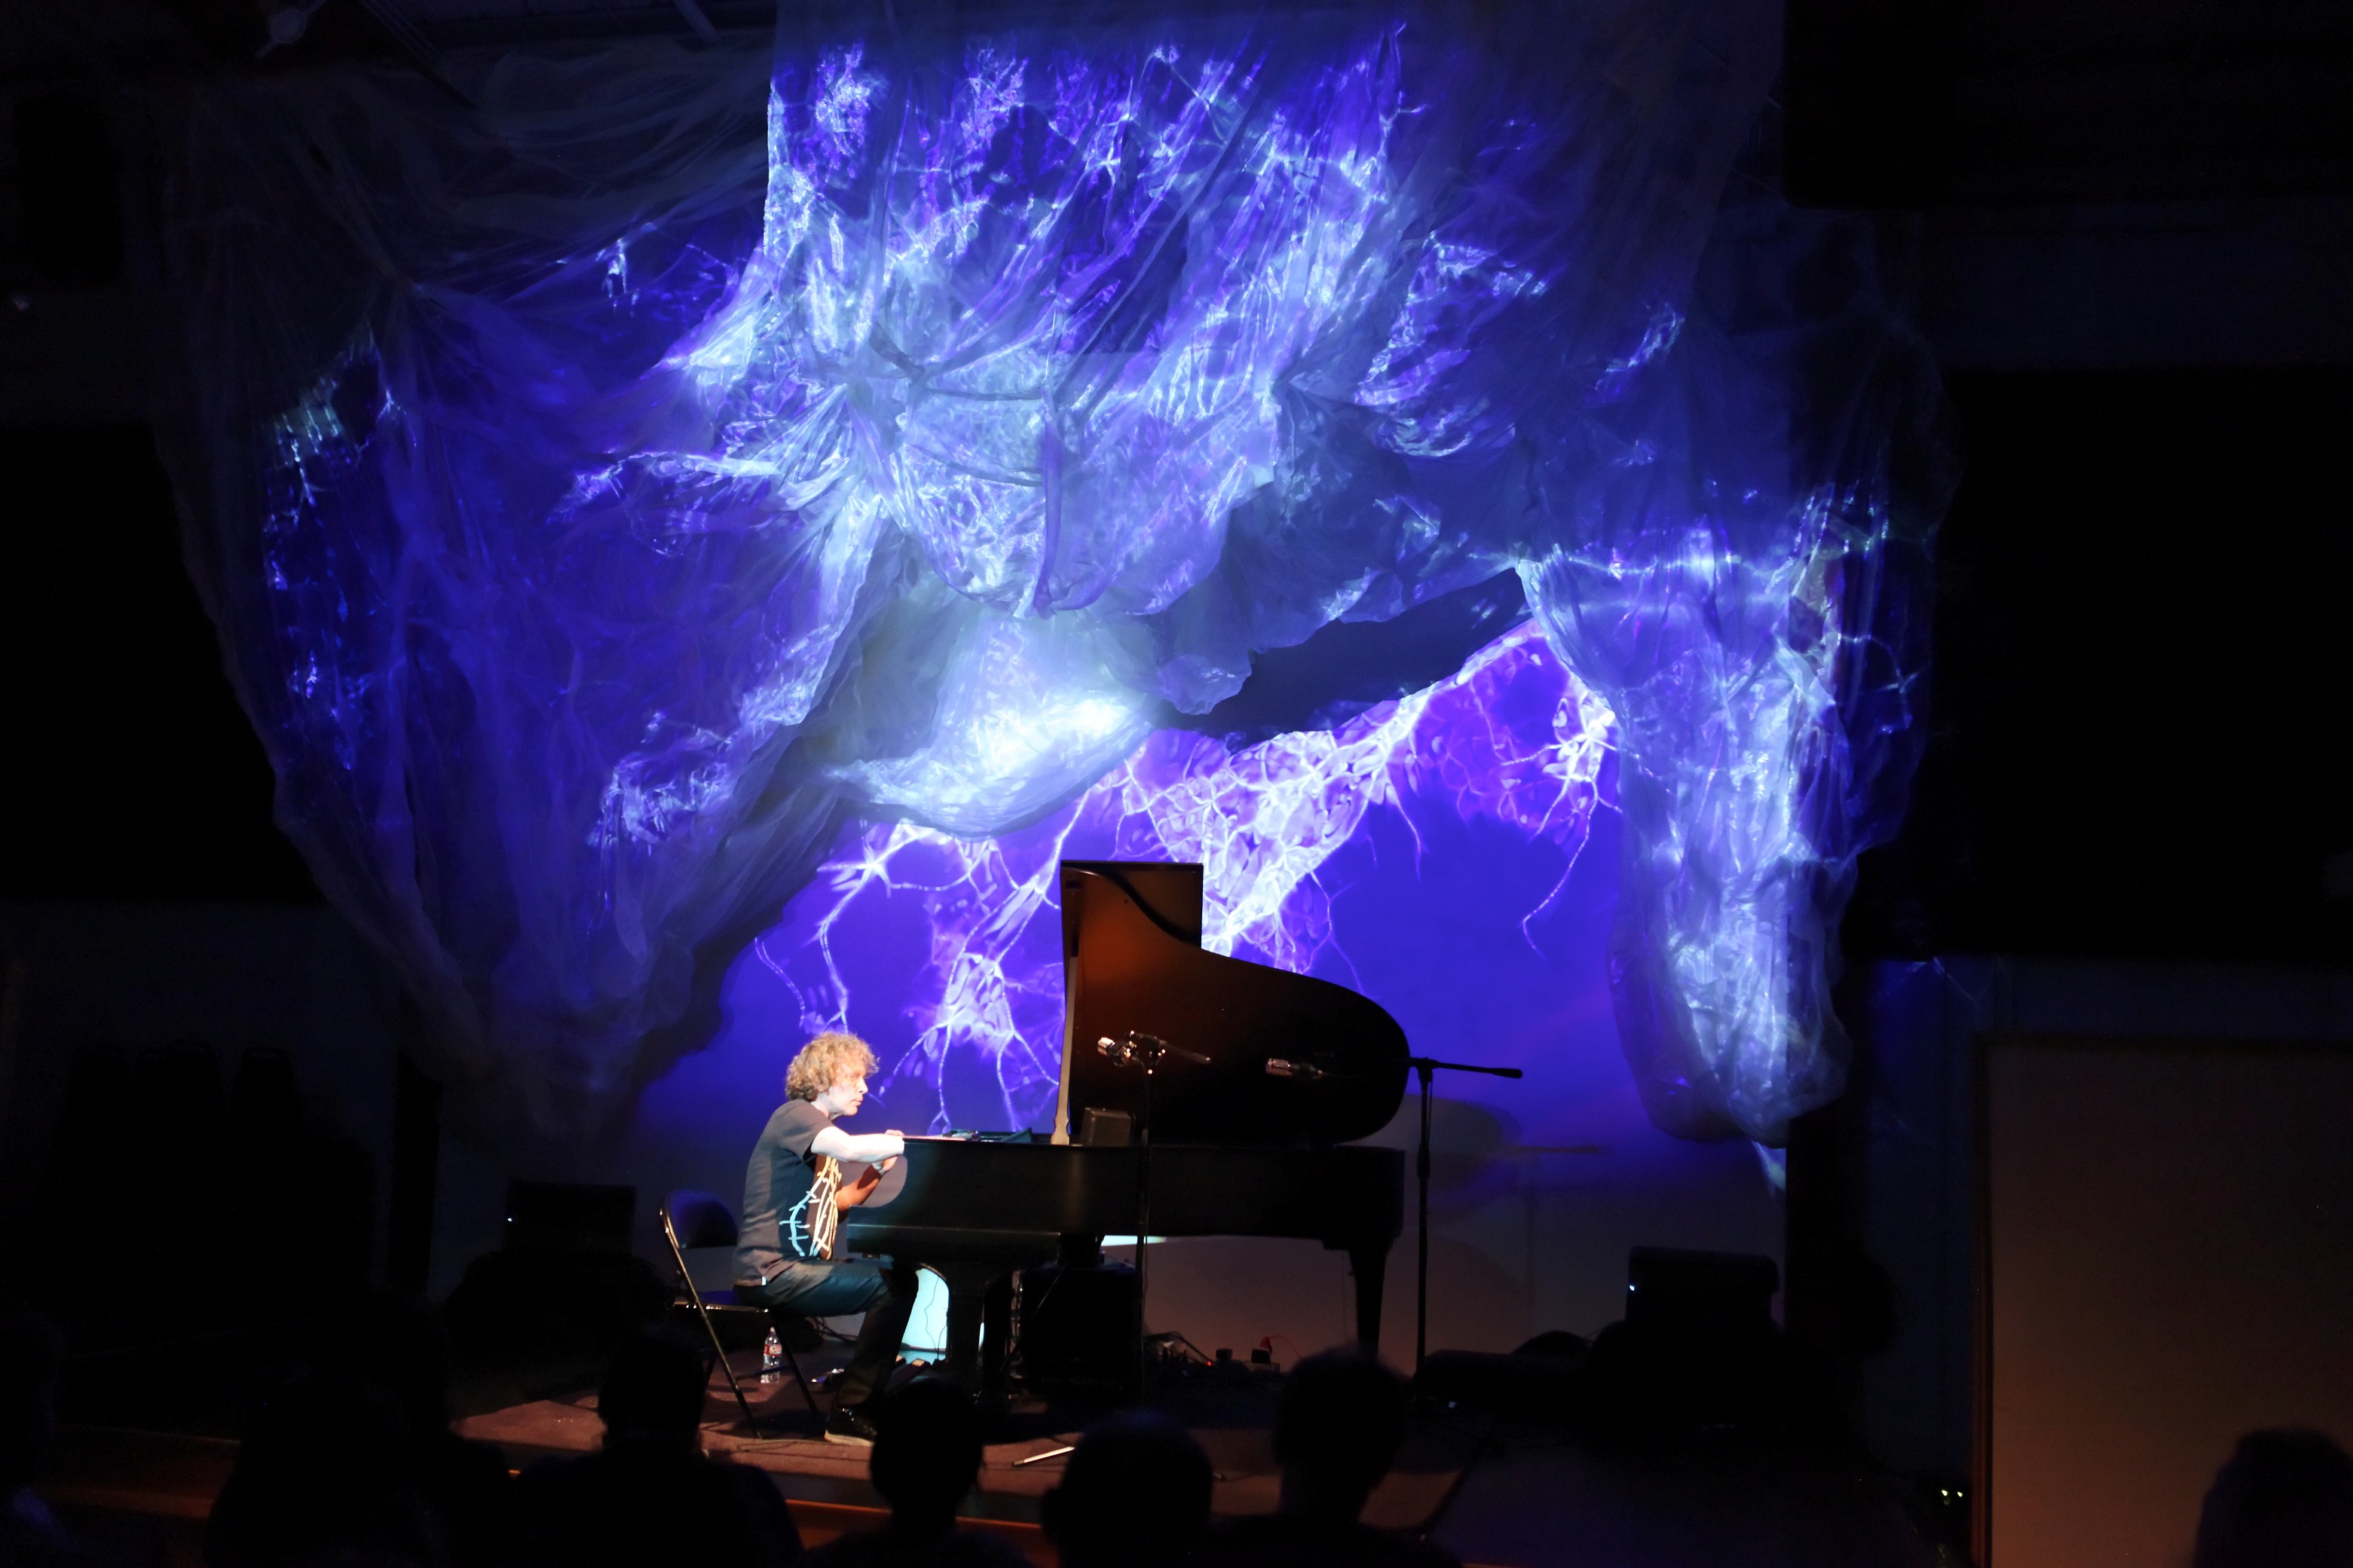 Composer-pianist Peter Manning Robinson unveils The Refractor Piano™ in its debut concert at Bergamot Station on April 28, 2016, in Santa Monica, California. Photo credit: Michael Rueter/Capture Imaging.